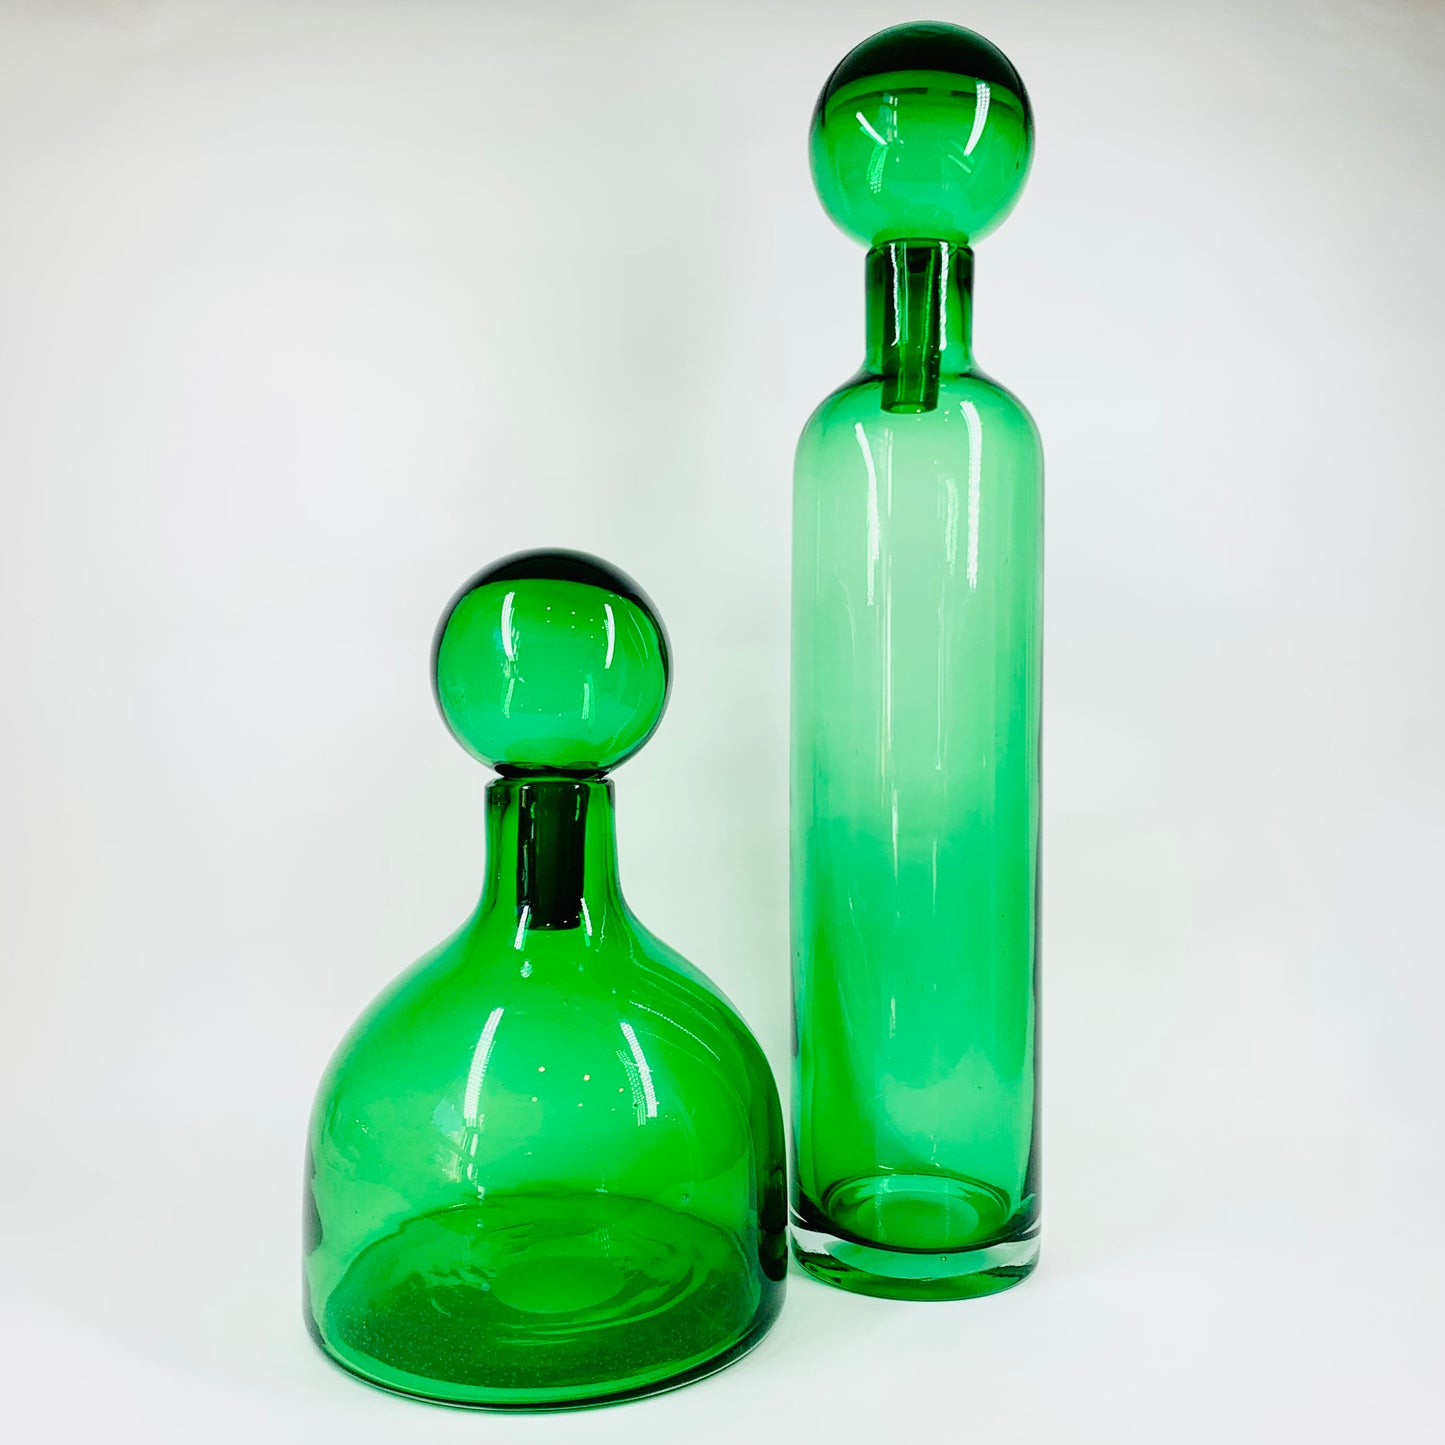 Rare mouth blown vintage Pols Potten green glass decanter bottle with matching stopper